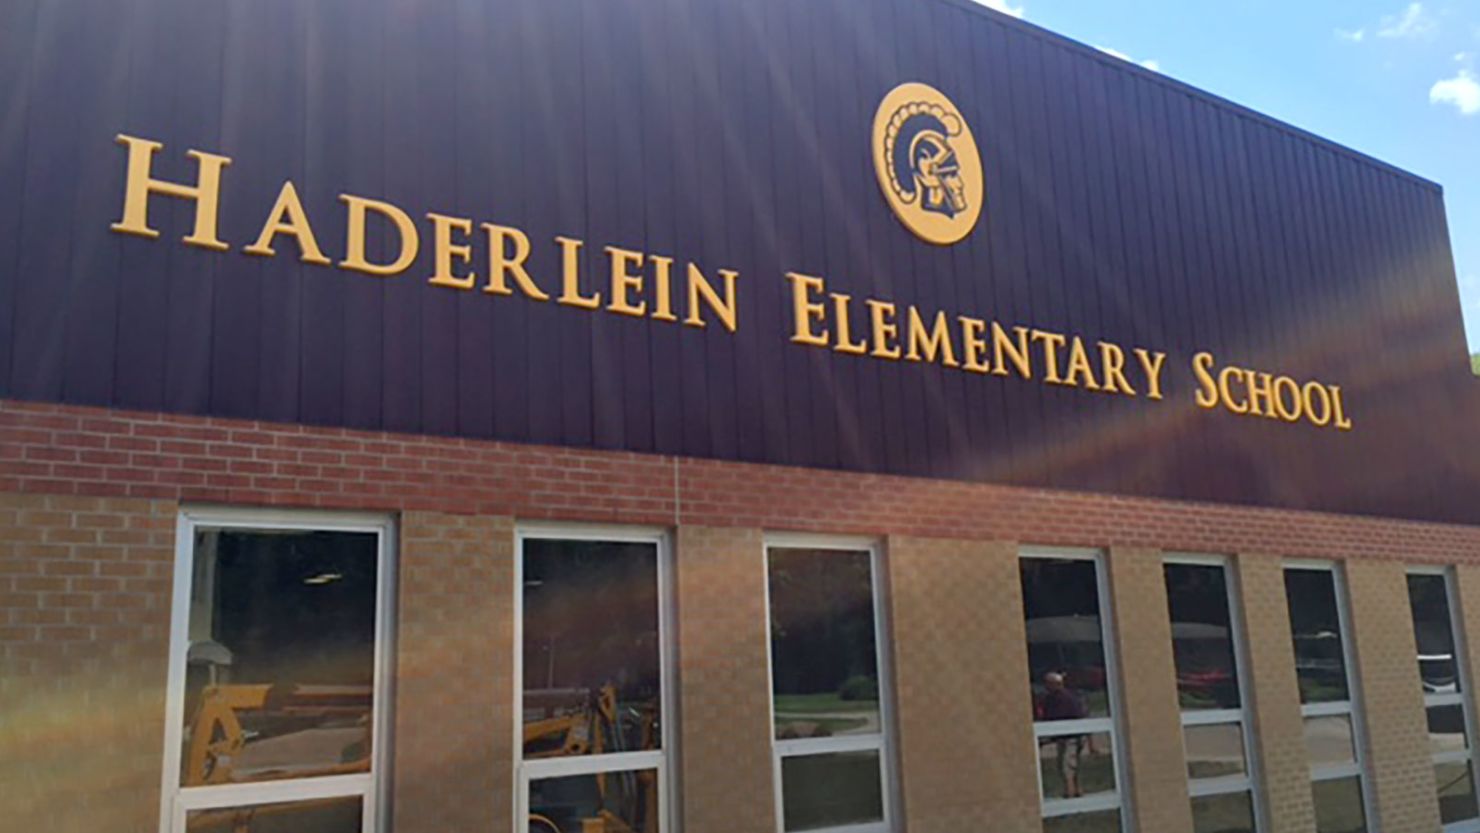 A photo of the R.V. Haderlein Elementary School taken from the school's web site.